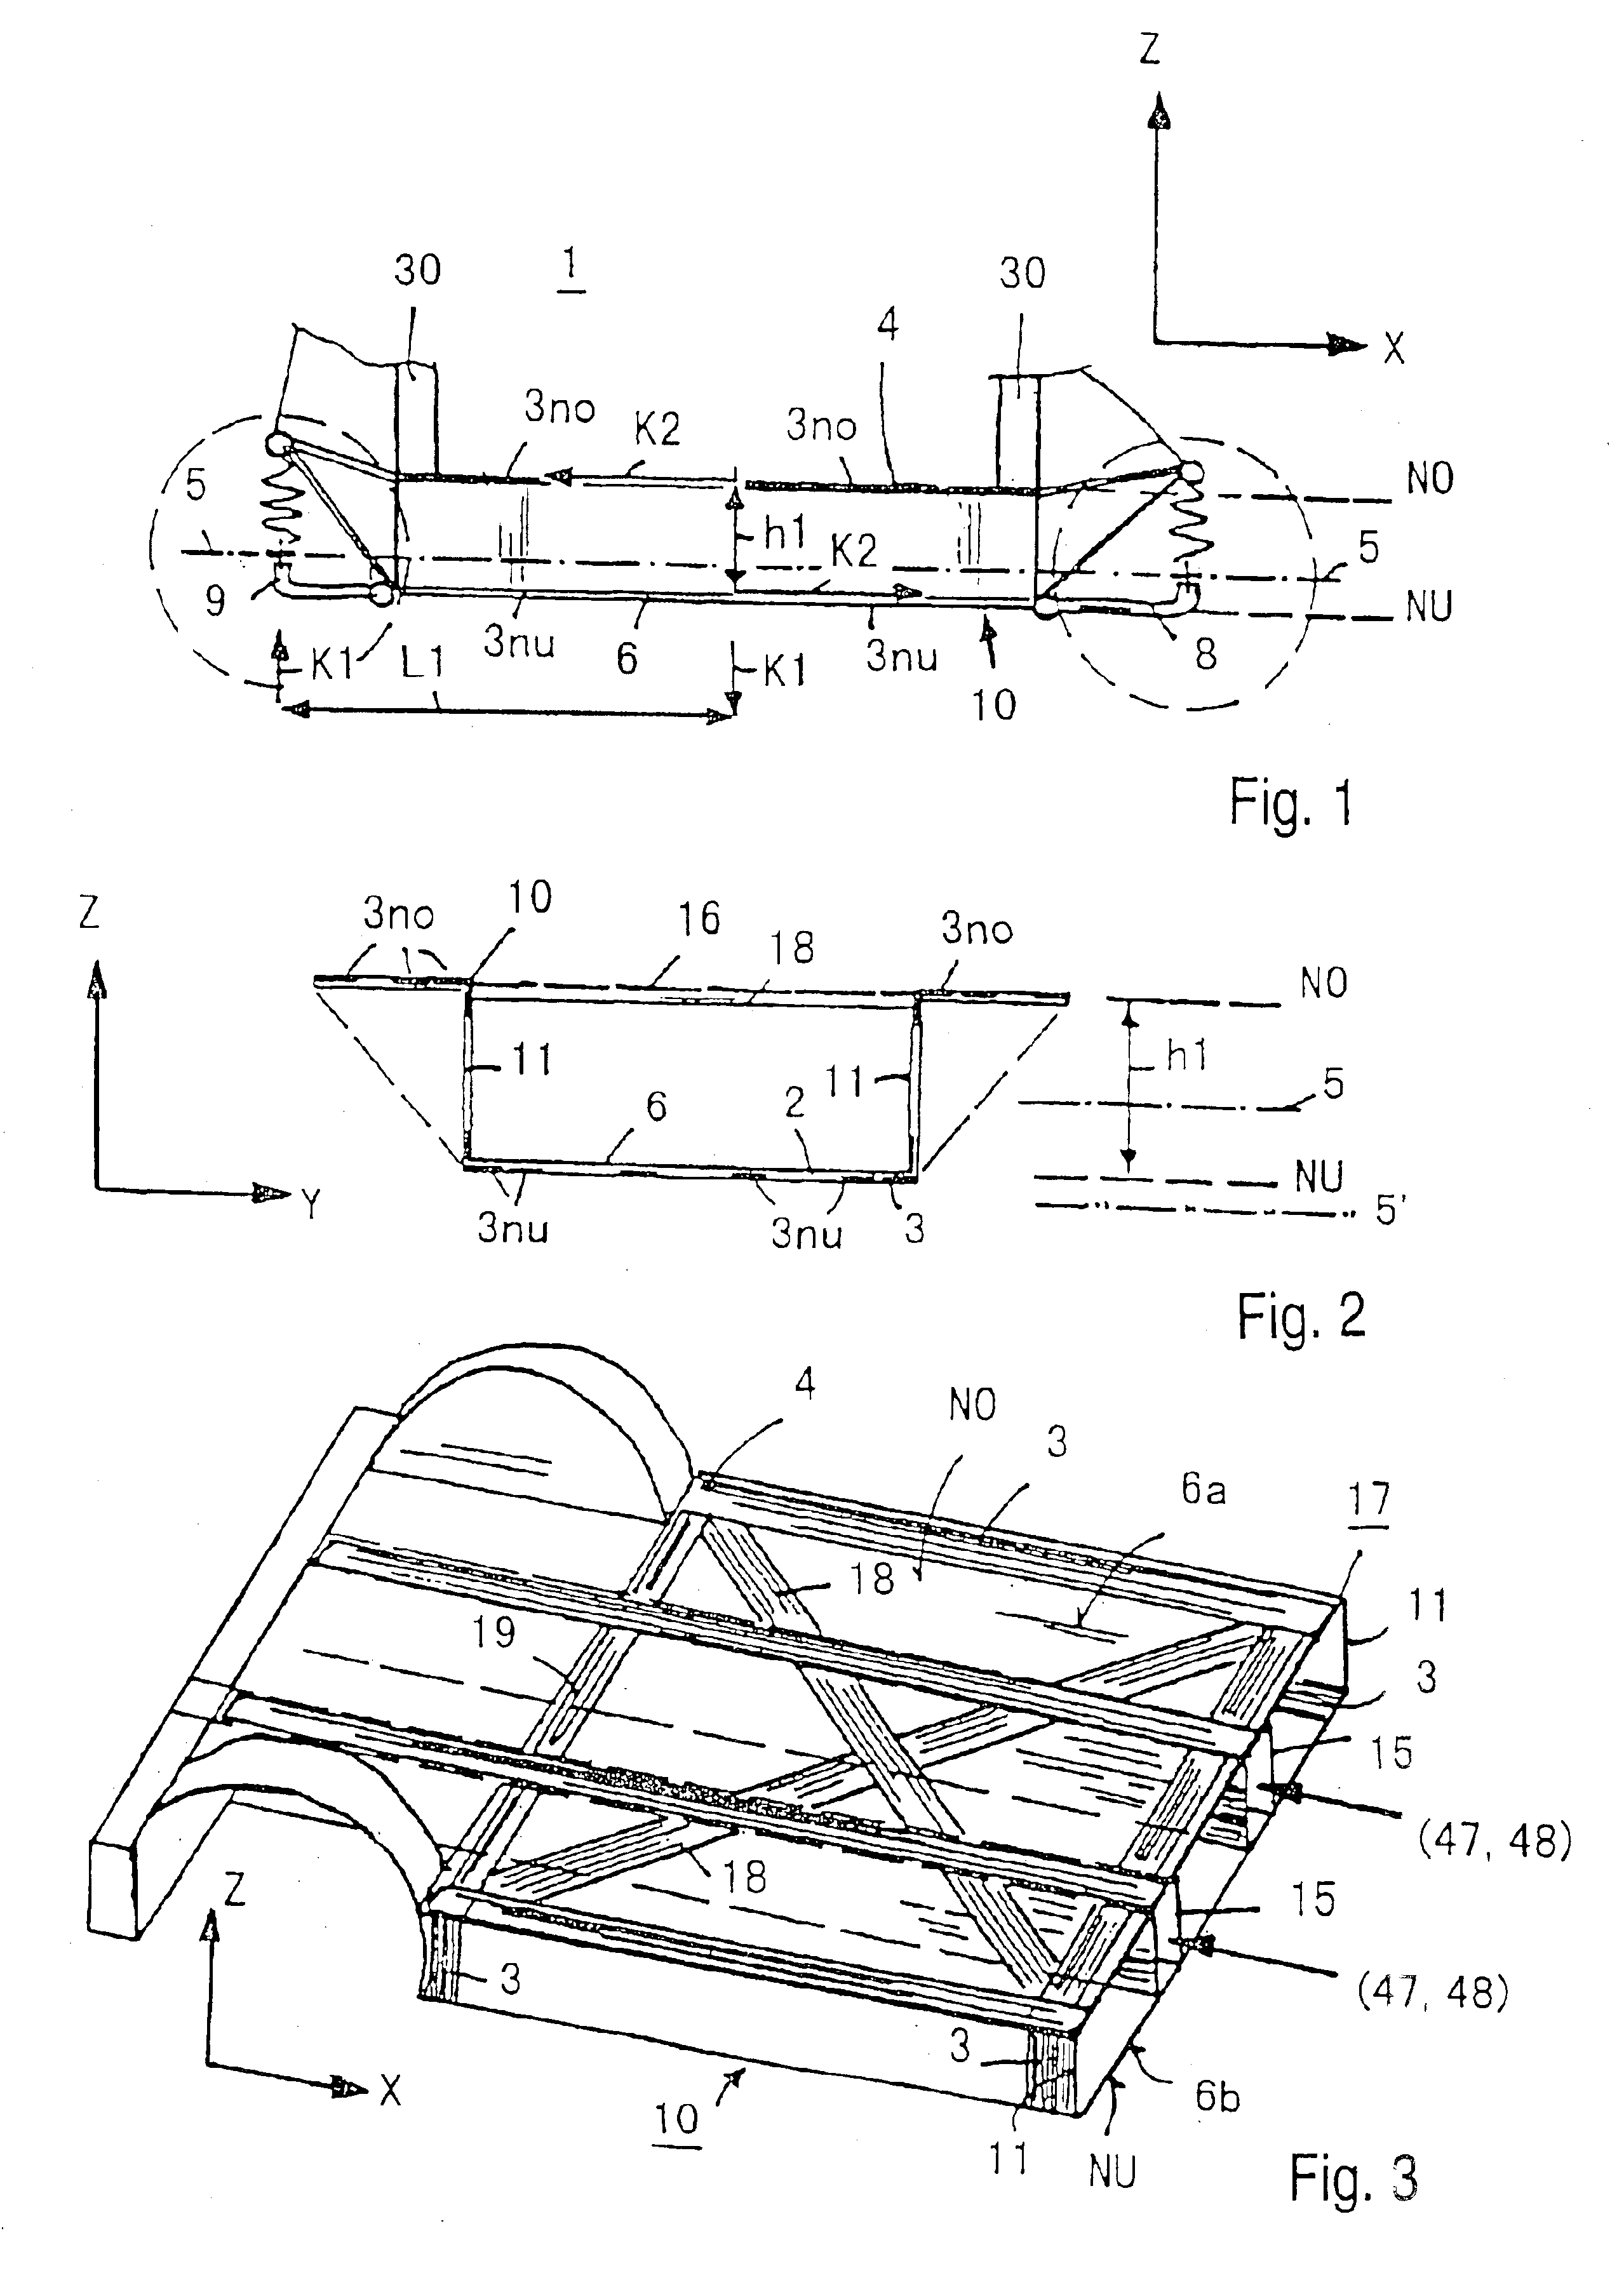 Fiber-reinforced thermoplastic vehicle cell